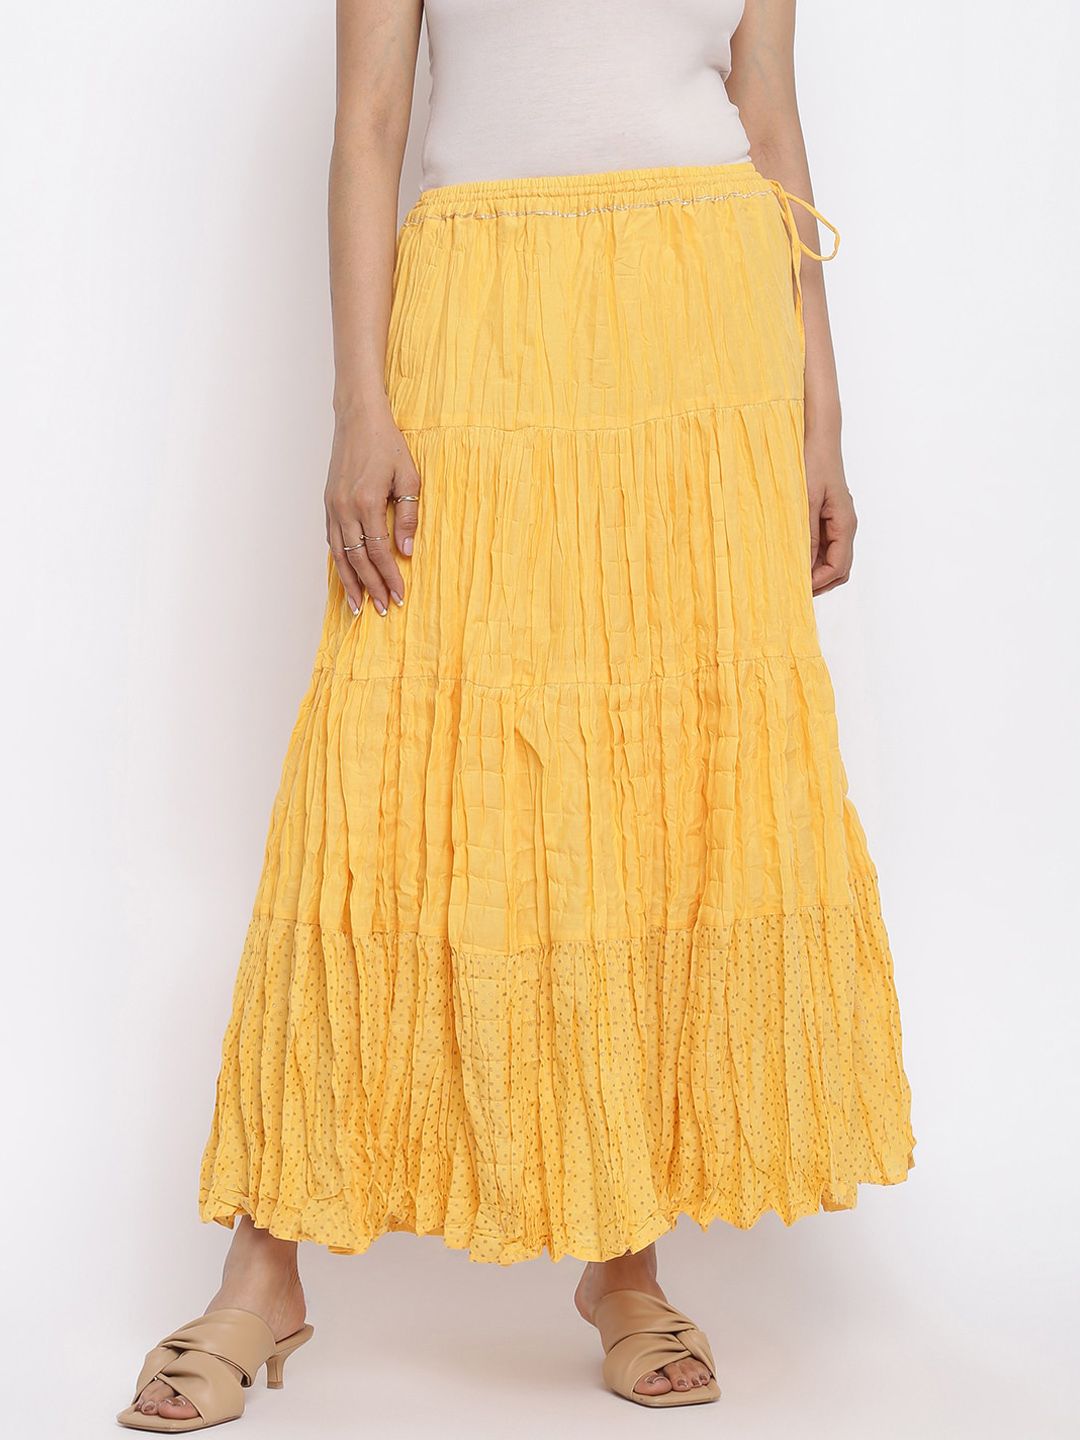 Fabindia Printed Cotton Tiered Long Skirt Price in India